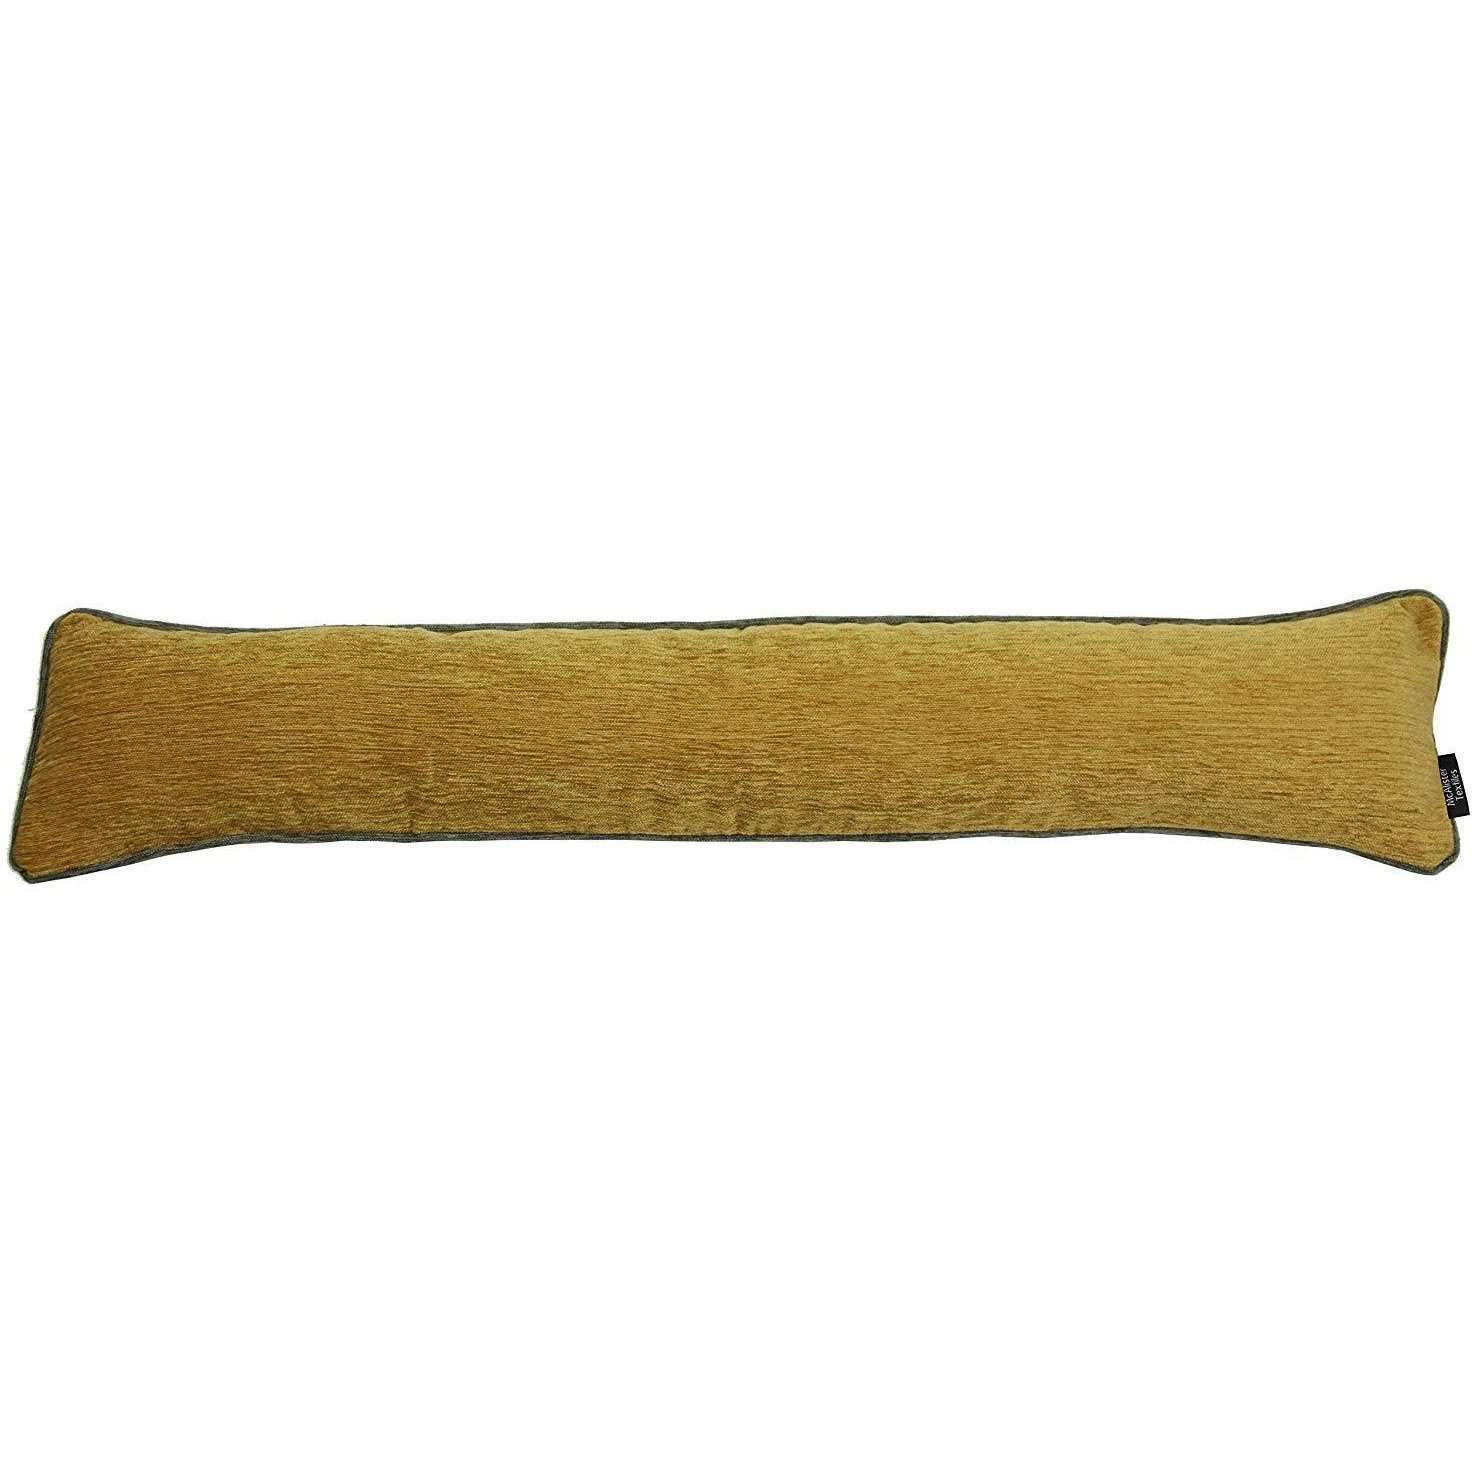 Plain Chenille Contrast Piped Yellow + Grey Draught Excluder, 18cm x 80cm